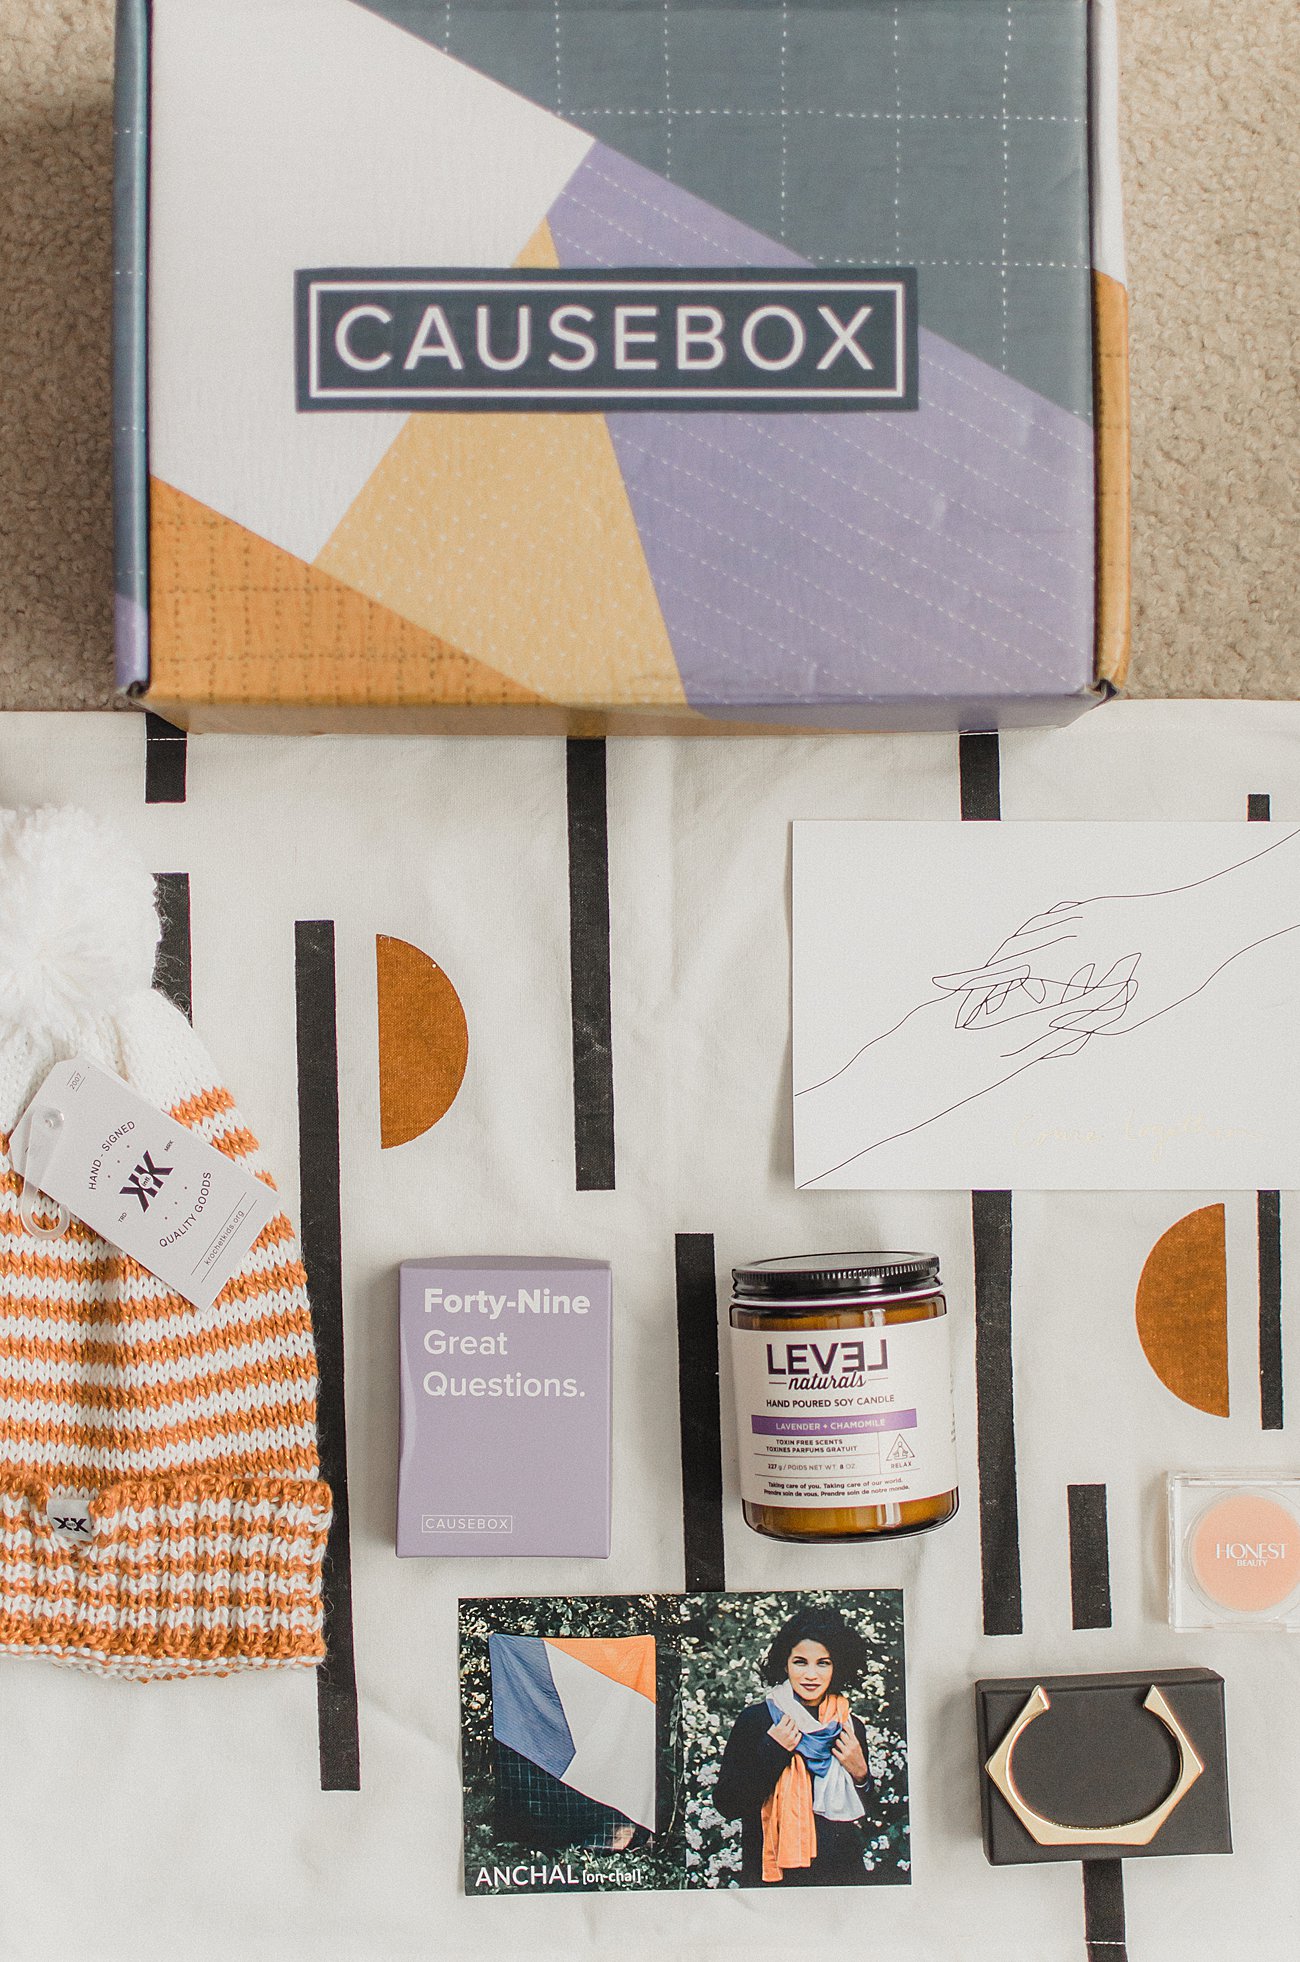 CAUSEBOX Winter Box Review (9) - CAUSEBOX Winter 2017 Review by North Caroline ethical fashion blogger Still Being Molly